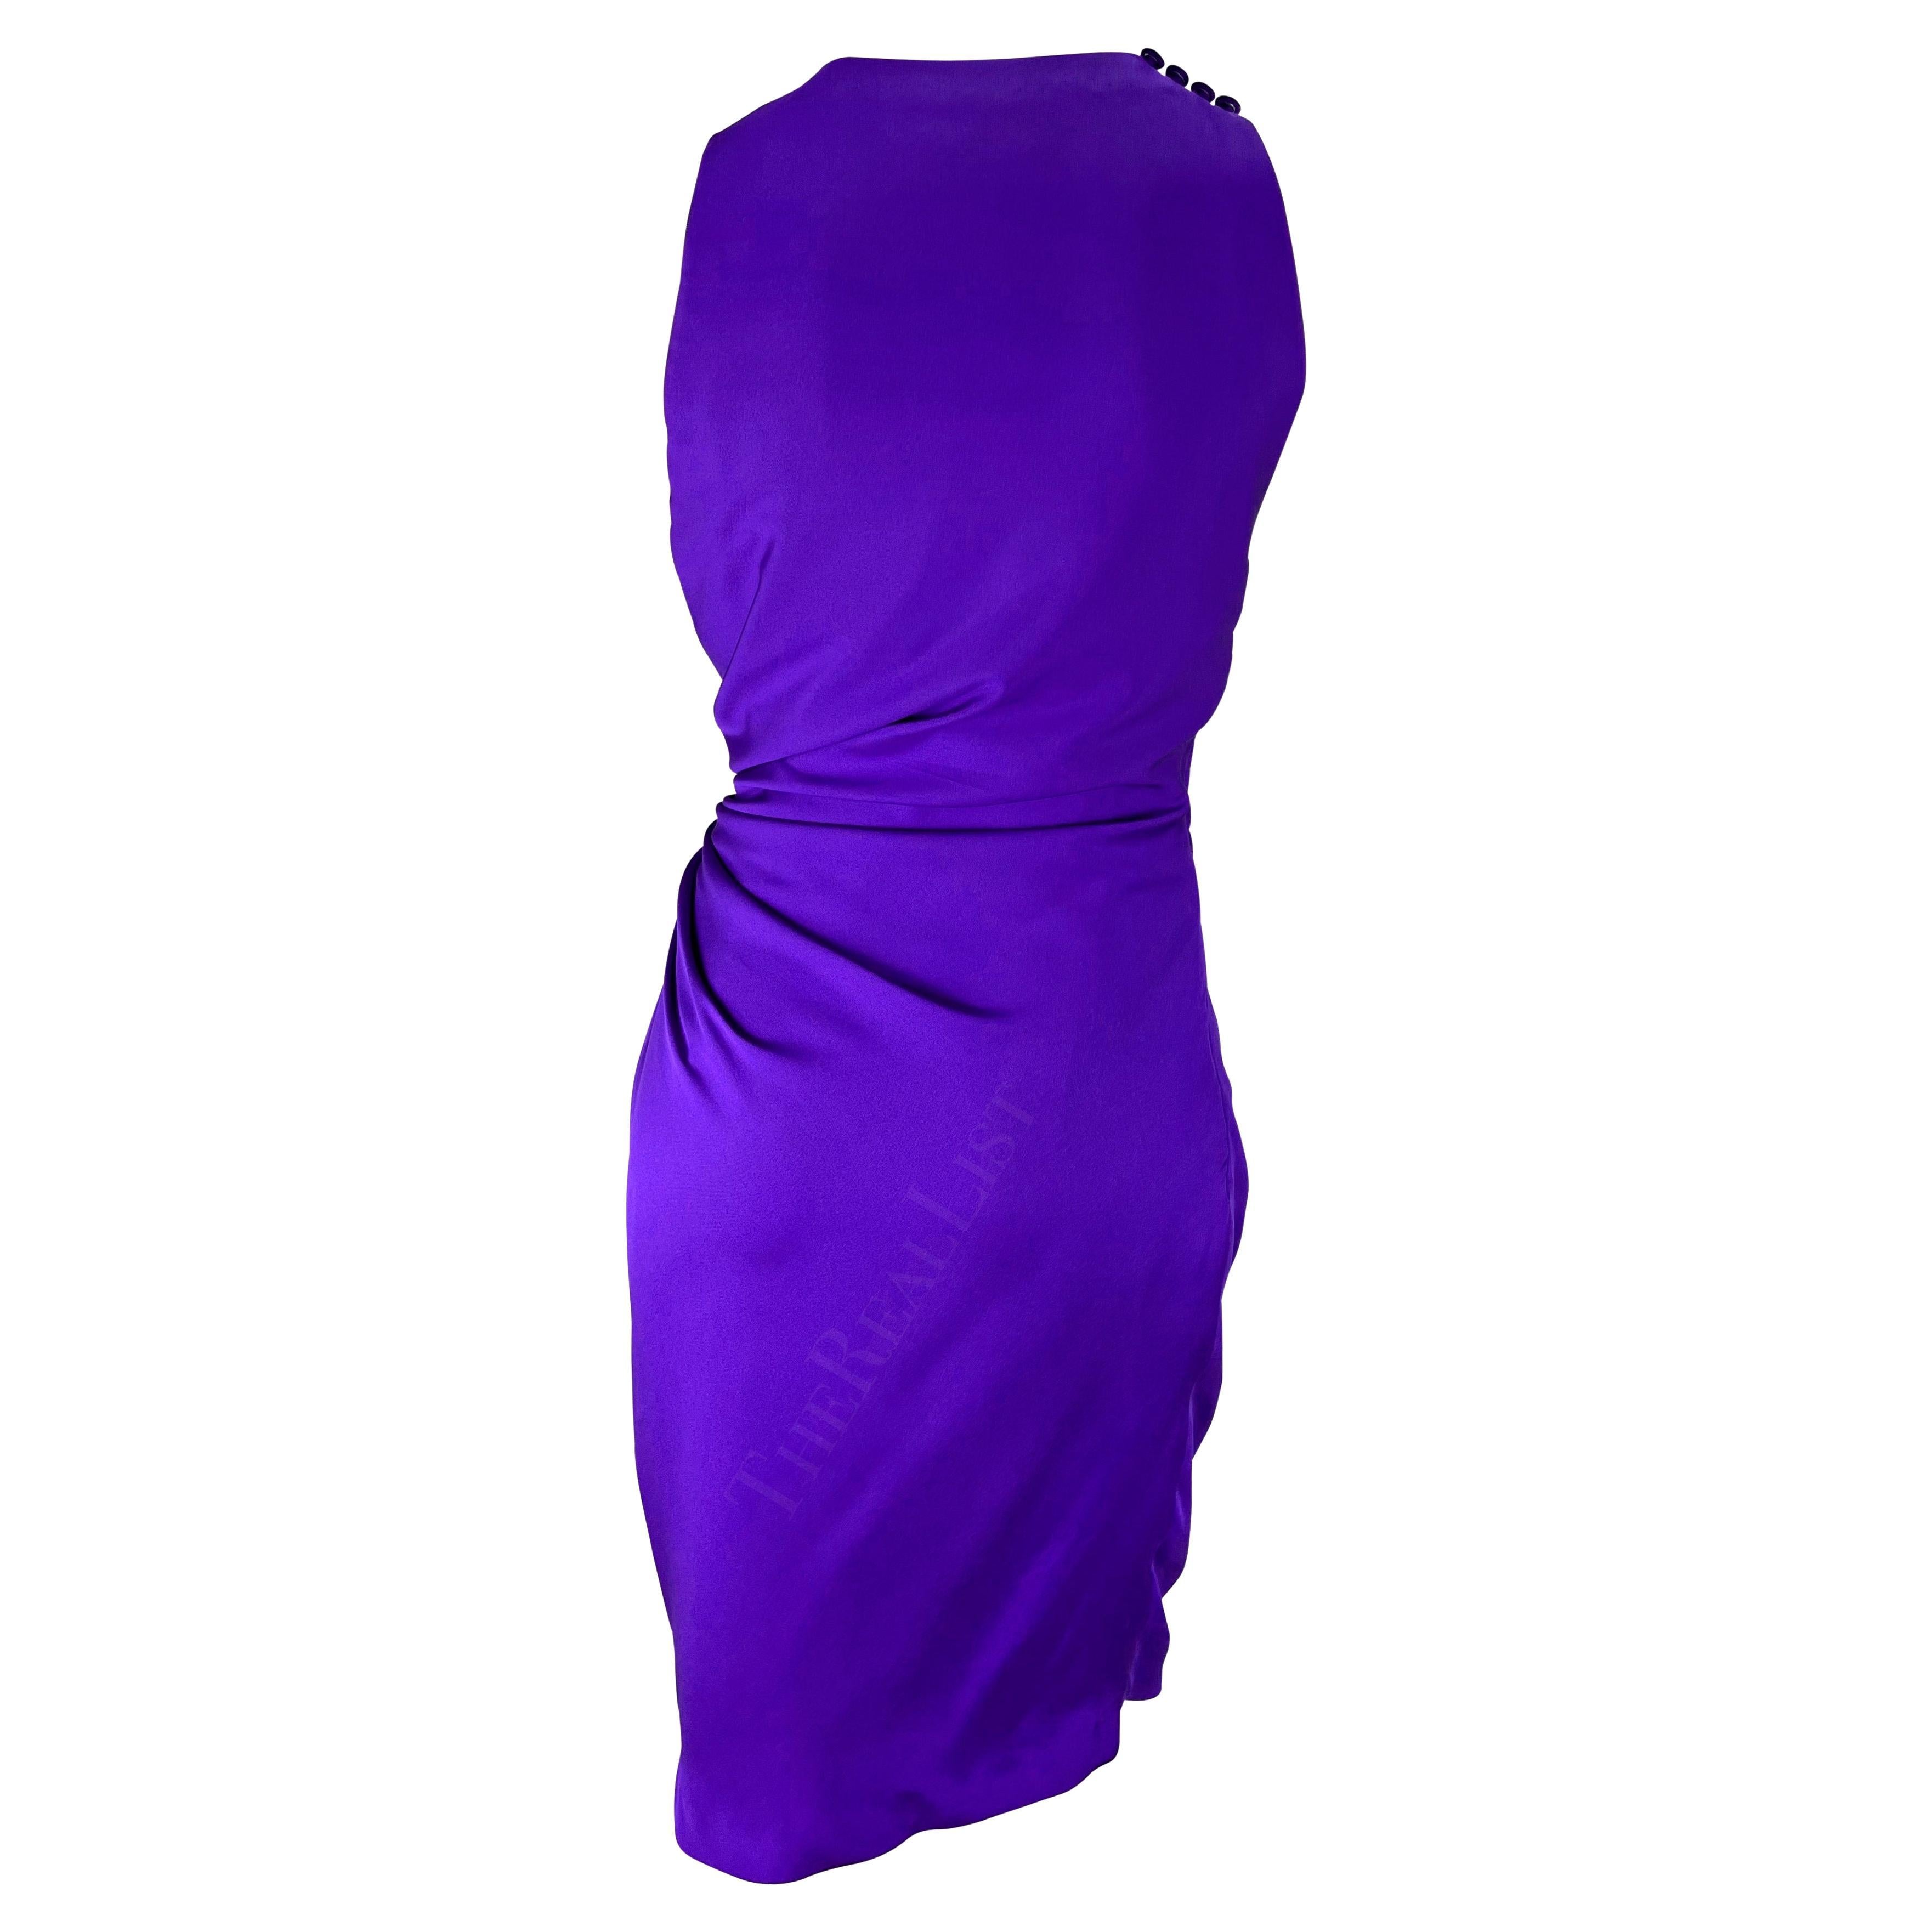 S/S 1991 Gianni Versace Purple Gathered Ruched Sleeveless Cocktail Dress For Sale 1